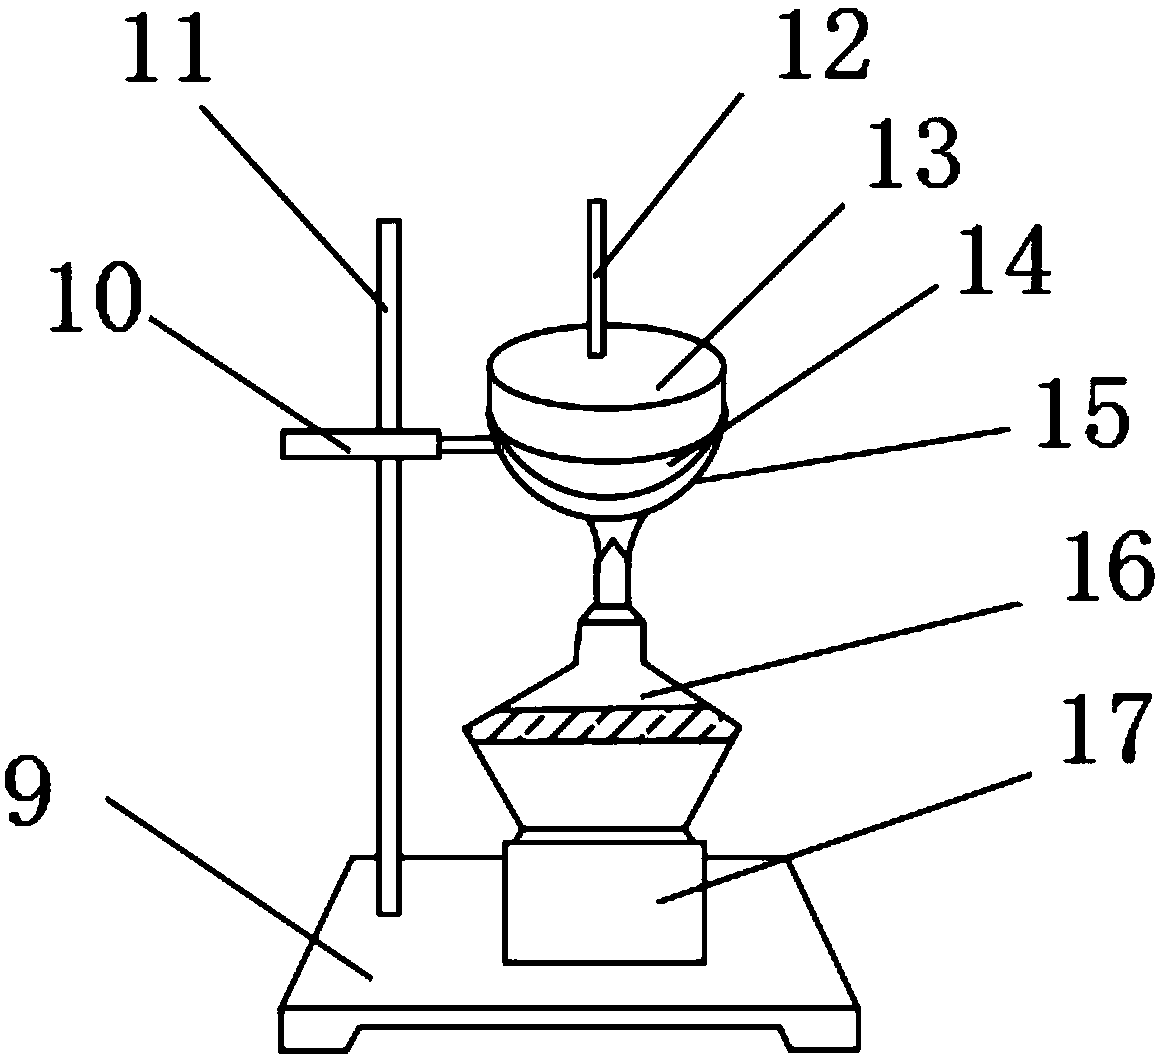 Recrystallization device for chemical product